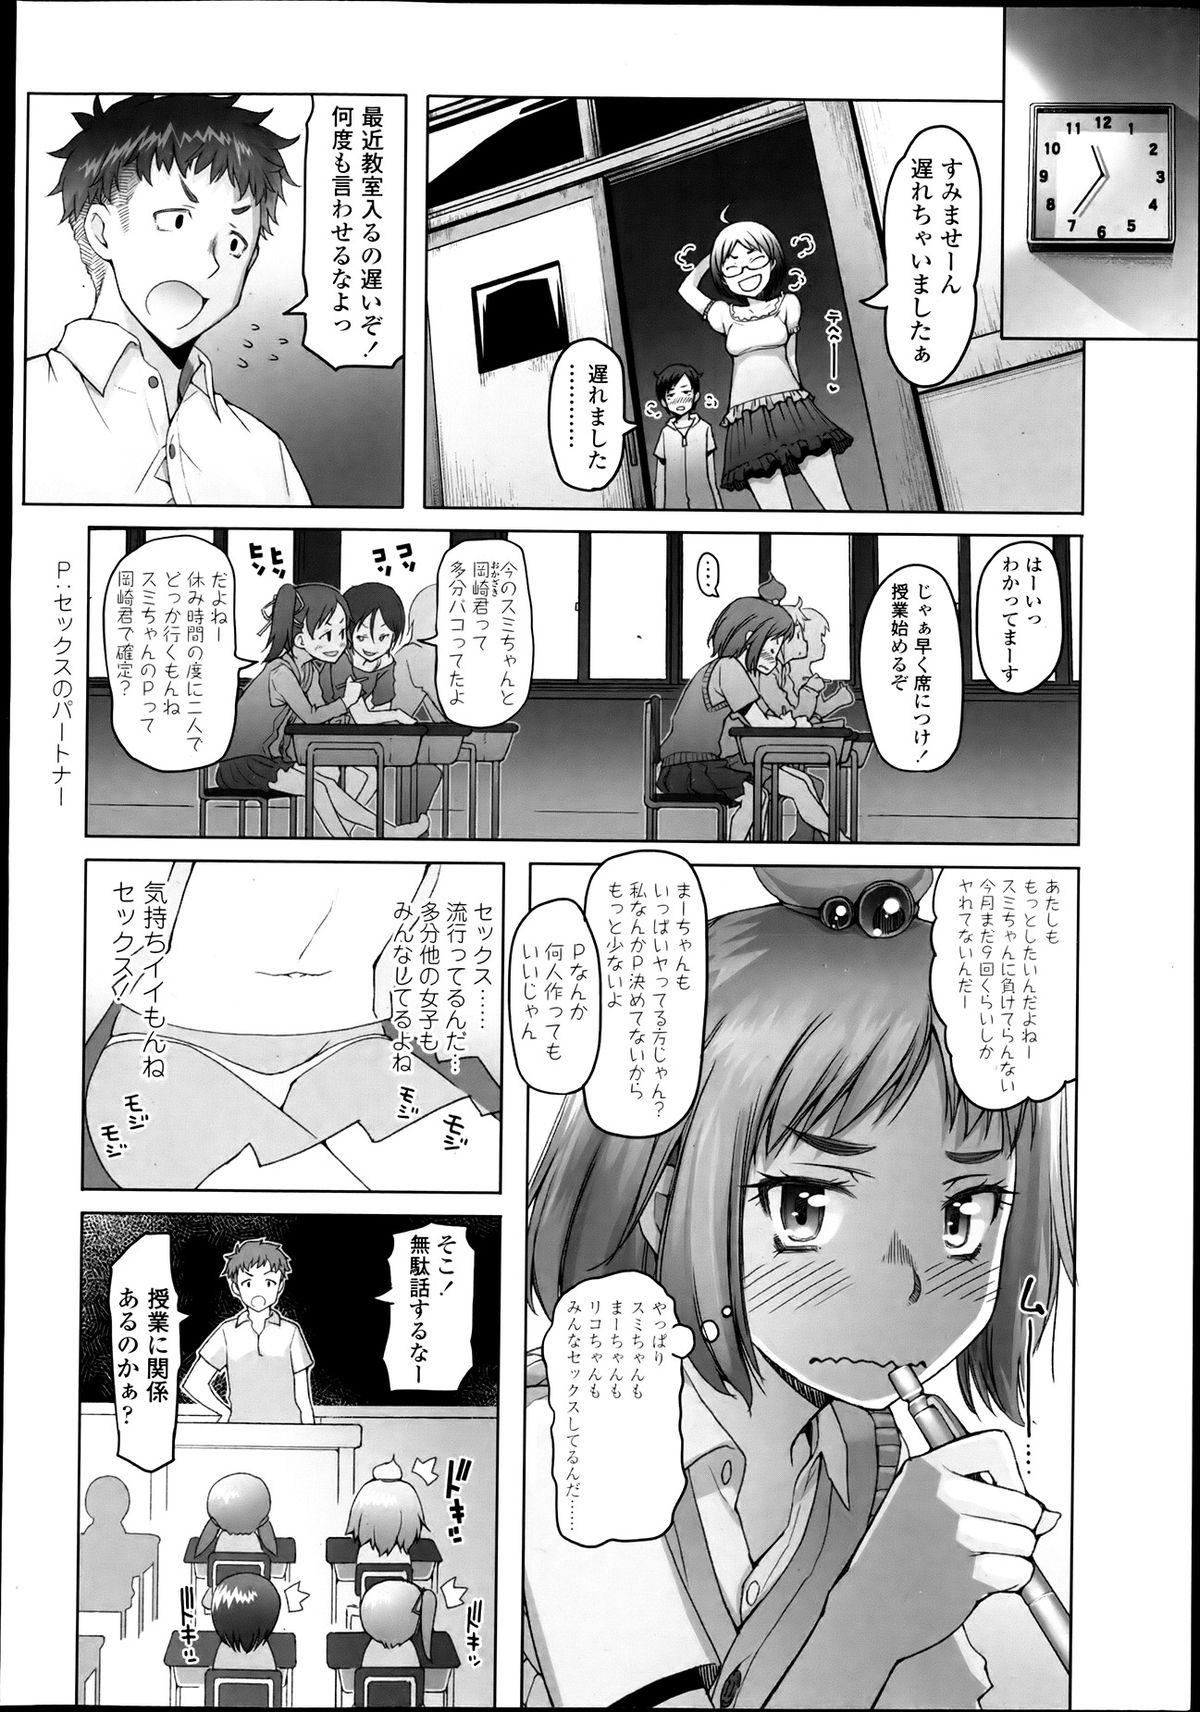 Tgirls COMIC LO 2013-07 Vol. 112 Bed - Page 7